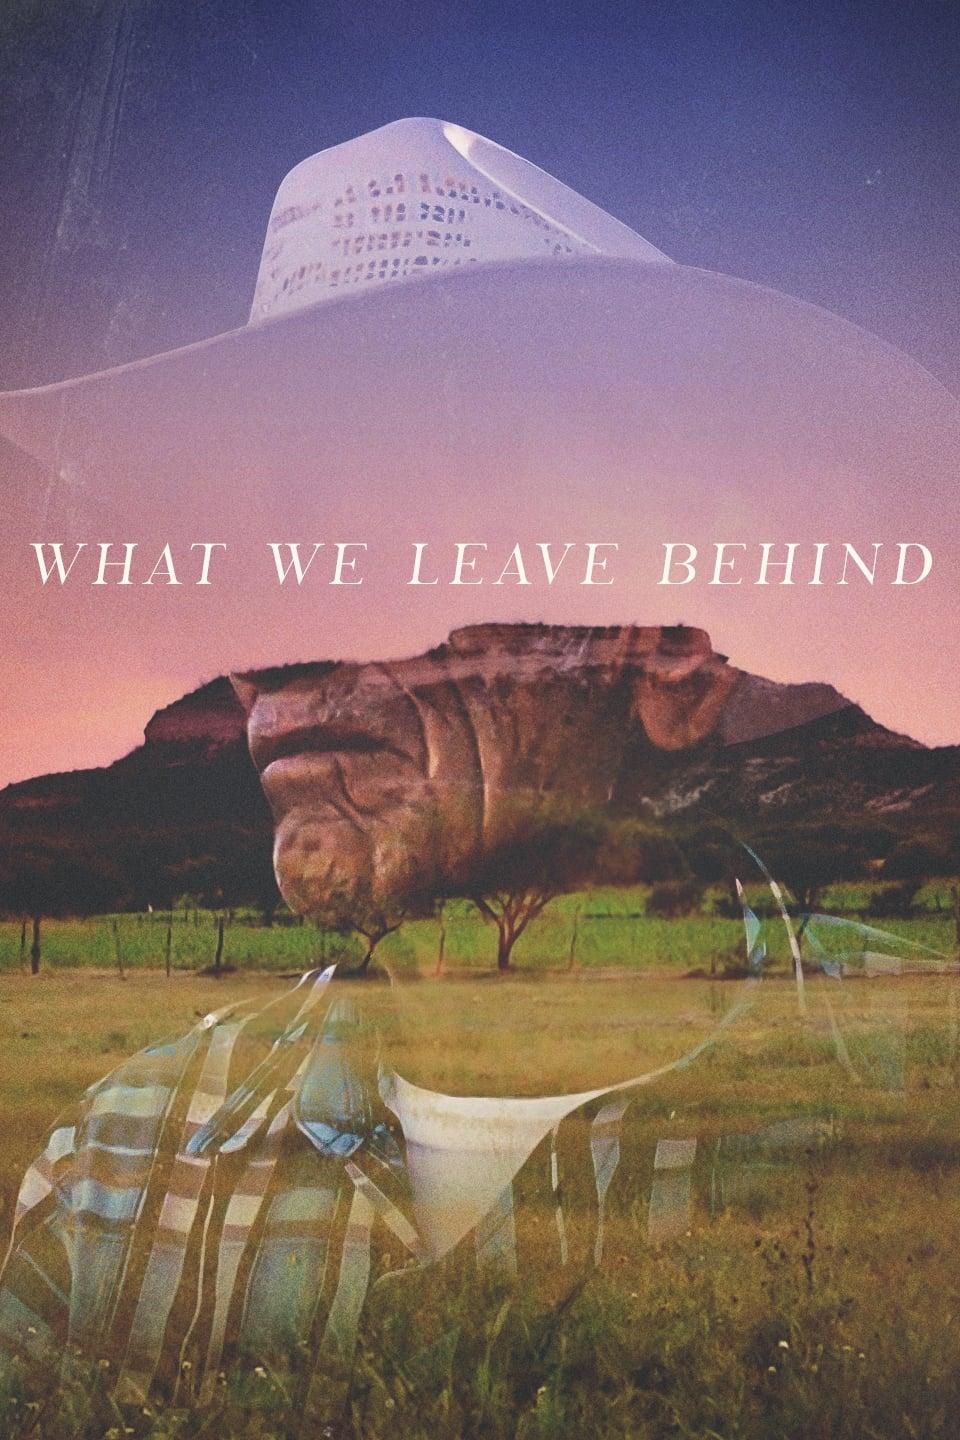 What We Leave Behind poster